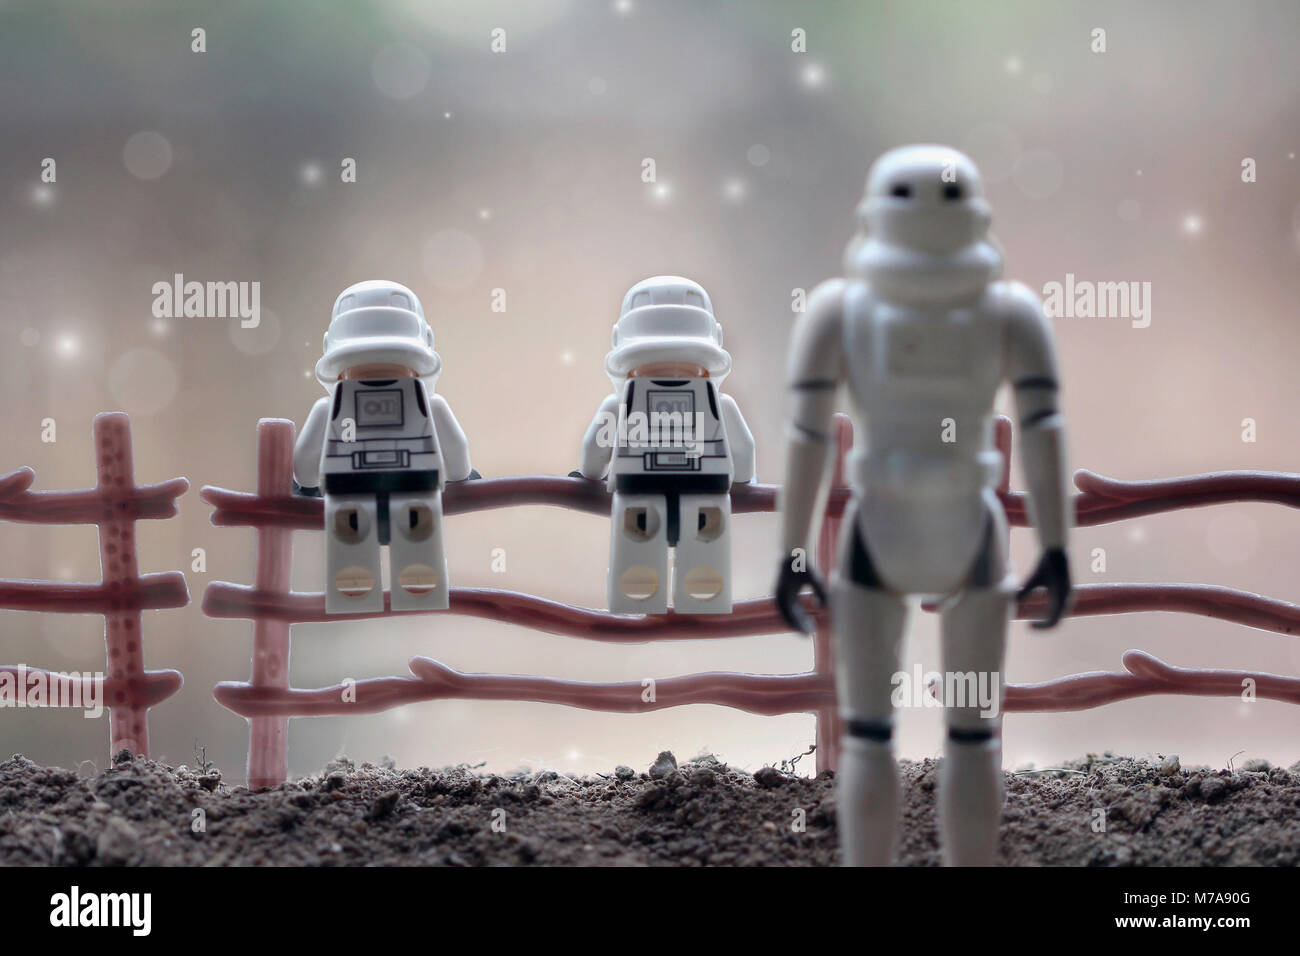 Lego Stormtrooper and Star Wars Stormtrooper action figure father and sons scene. Stock Photo